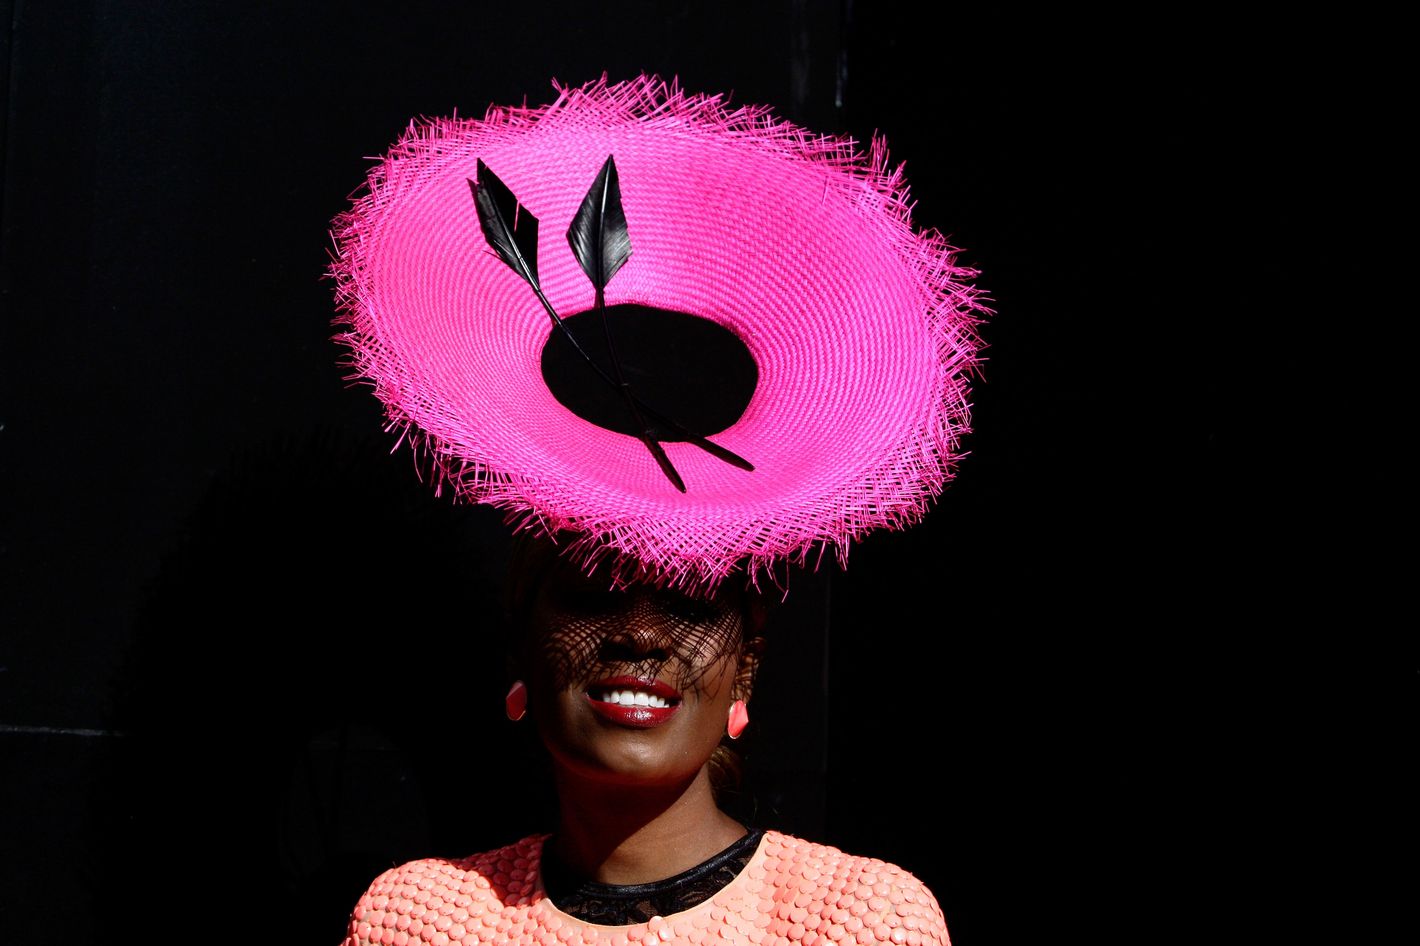 All the Kooky, Vibrant Hats of the Melbourne